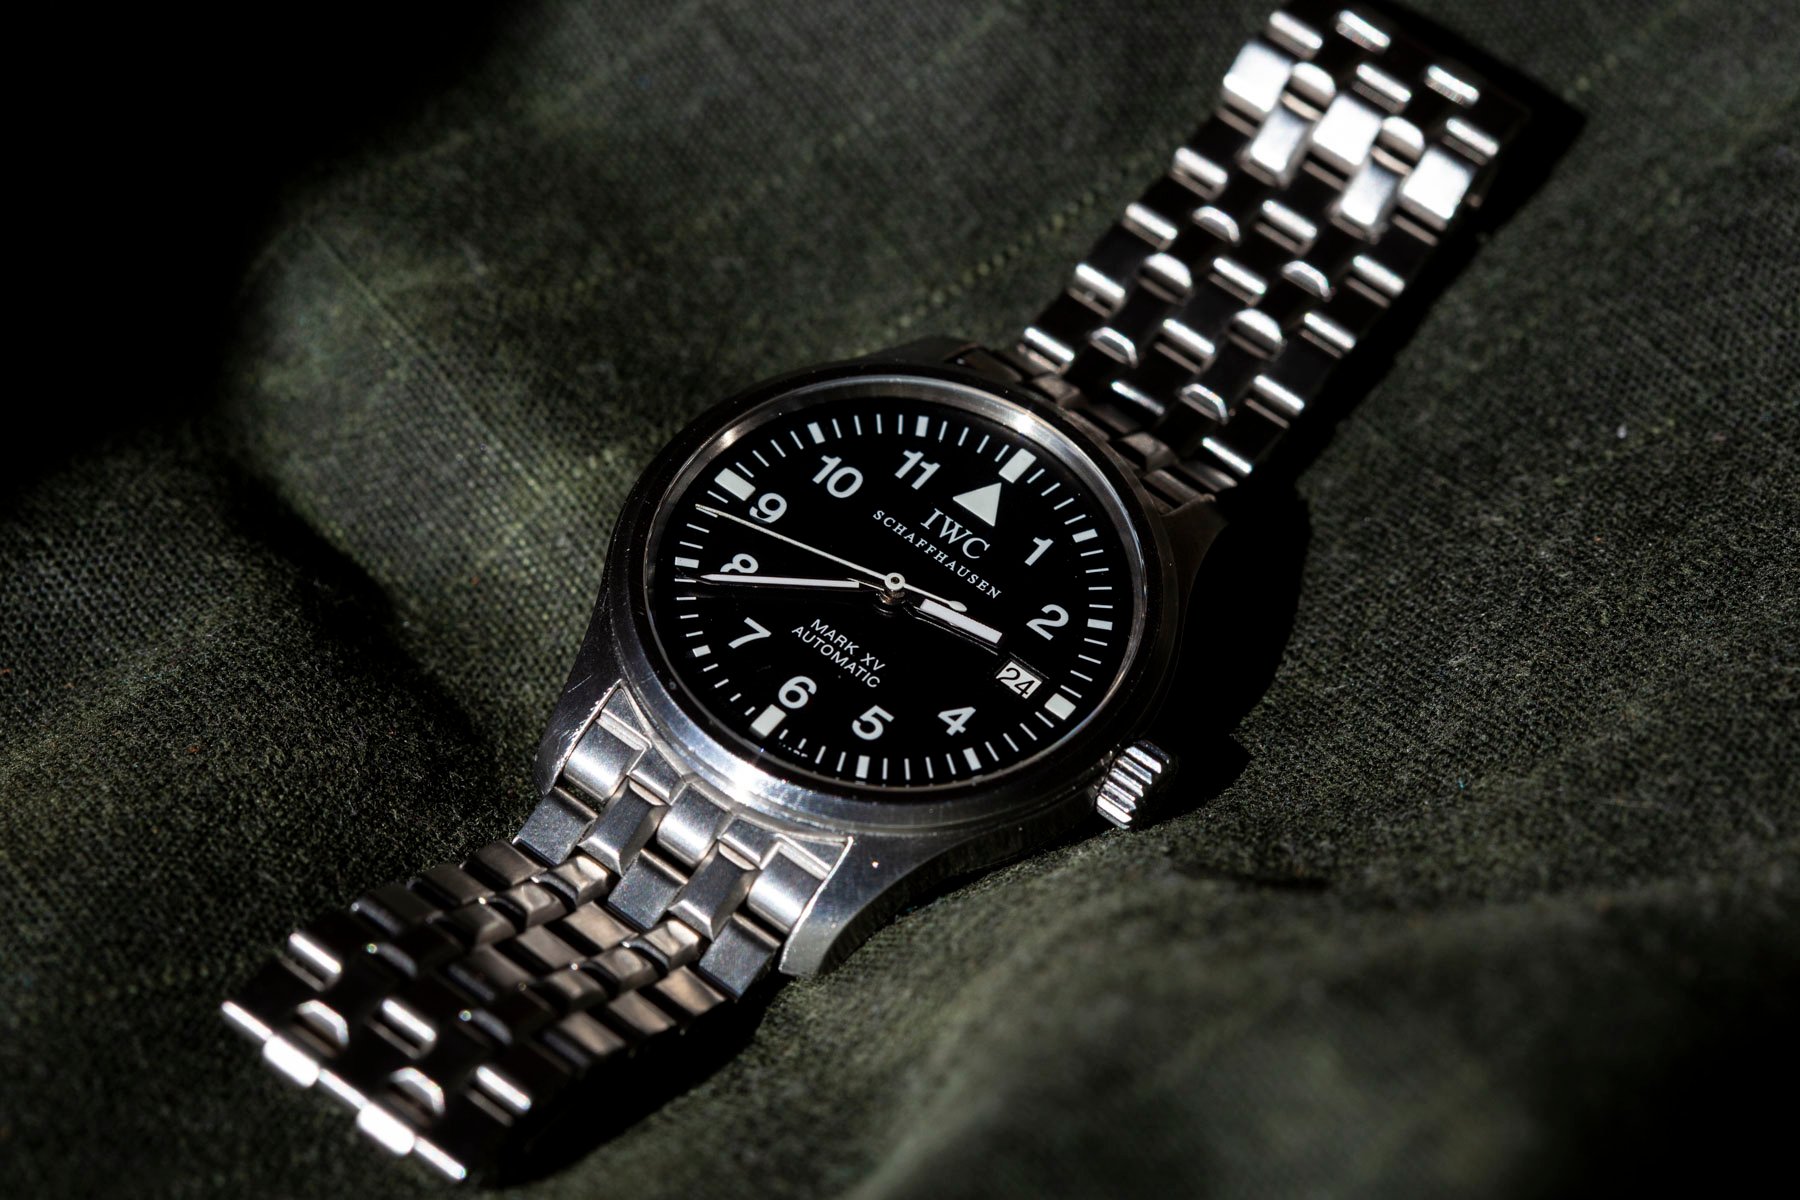 Introducing the Manchester Watch Works P. marcidus Diver (AKA the “Blobfish”)